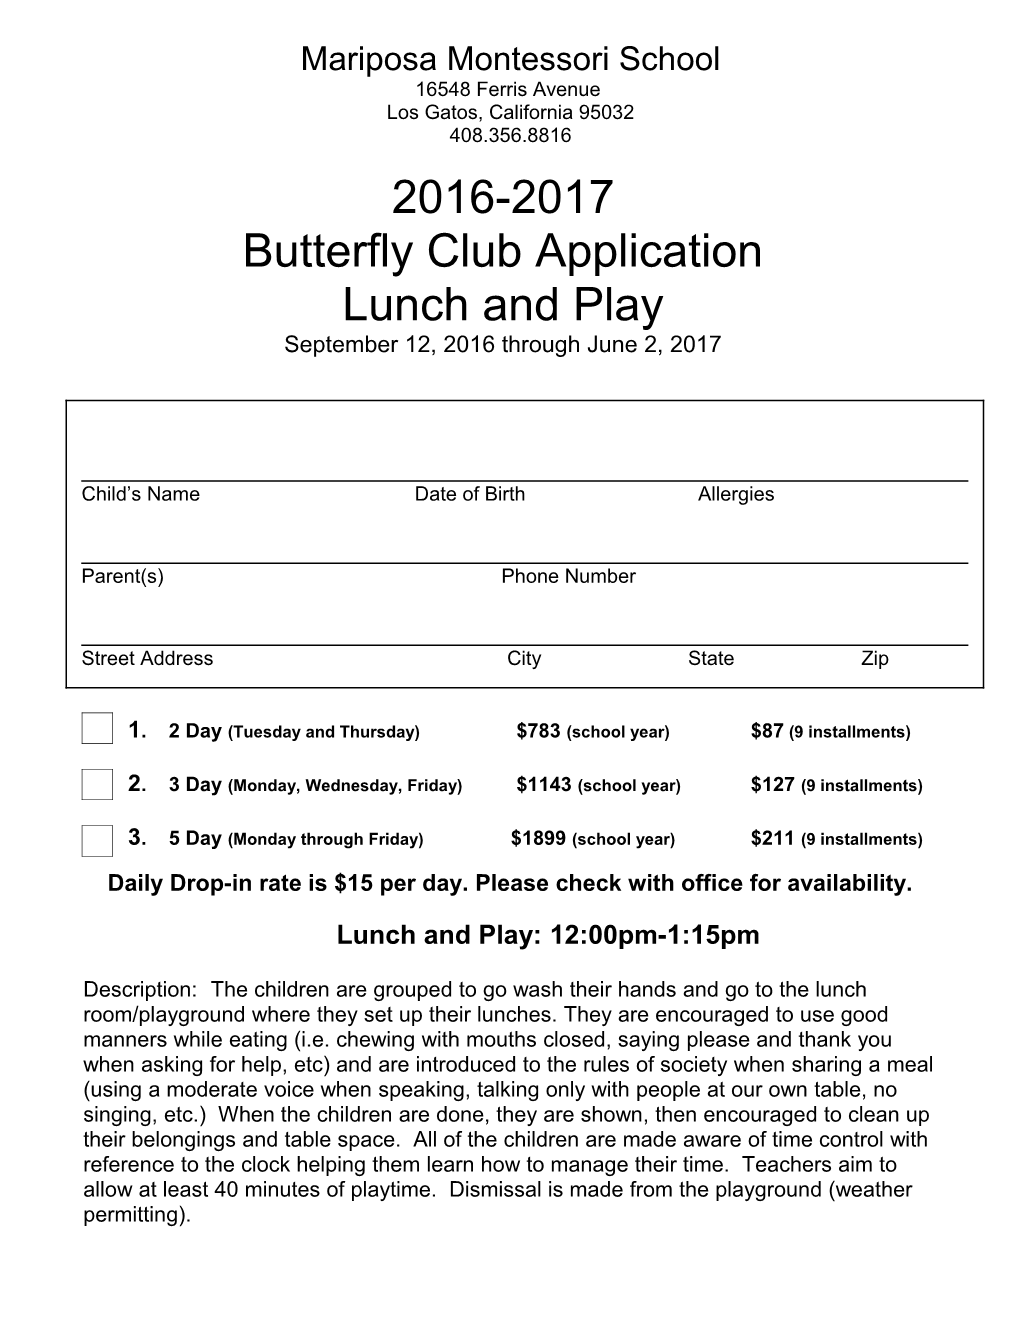 2008-2009 Butterfly Club Application